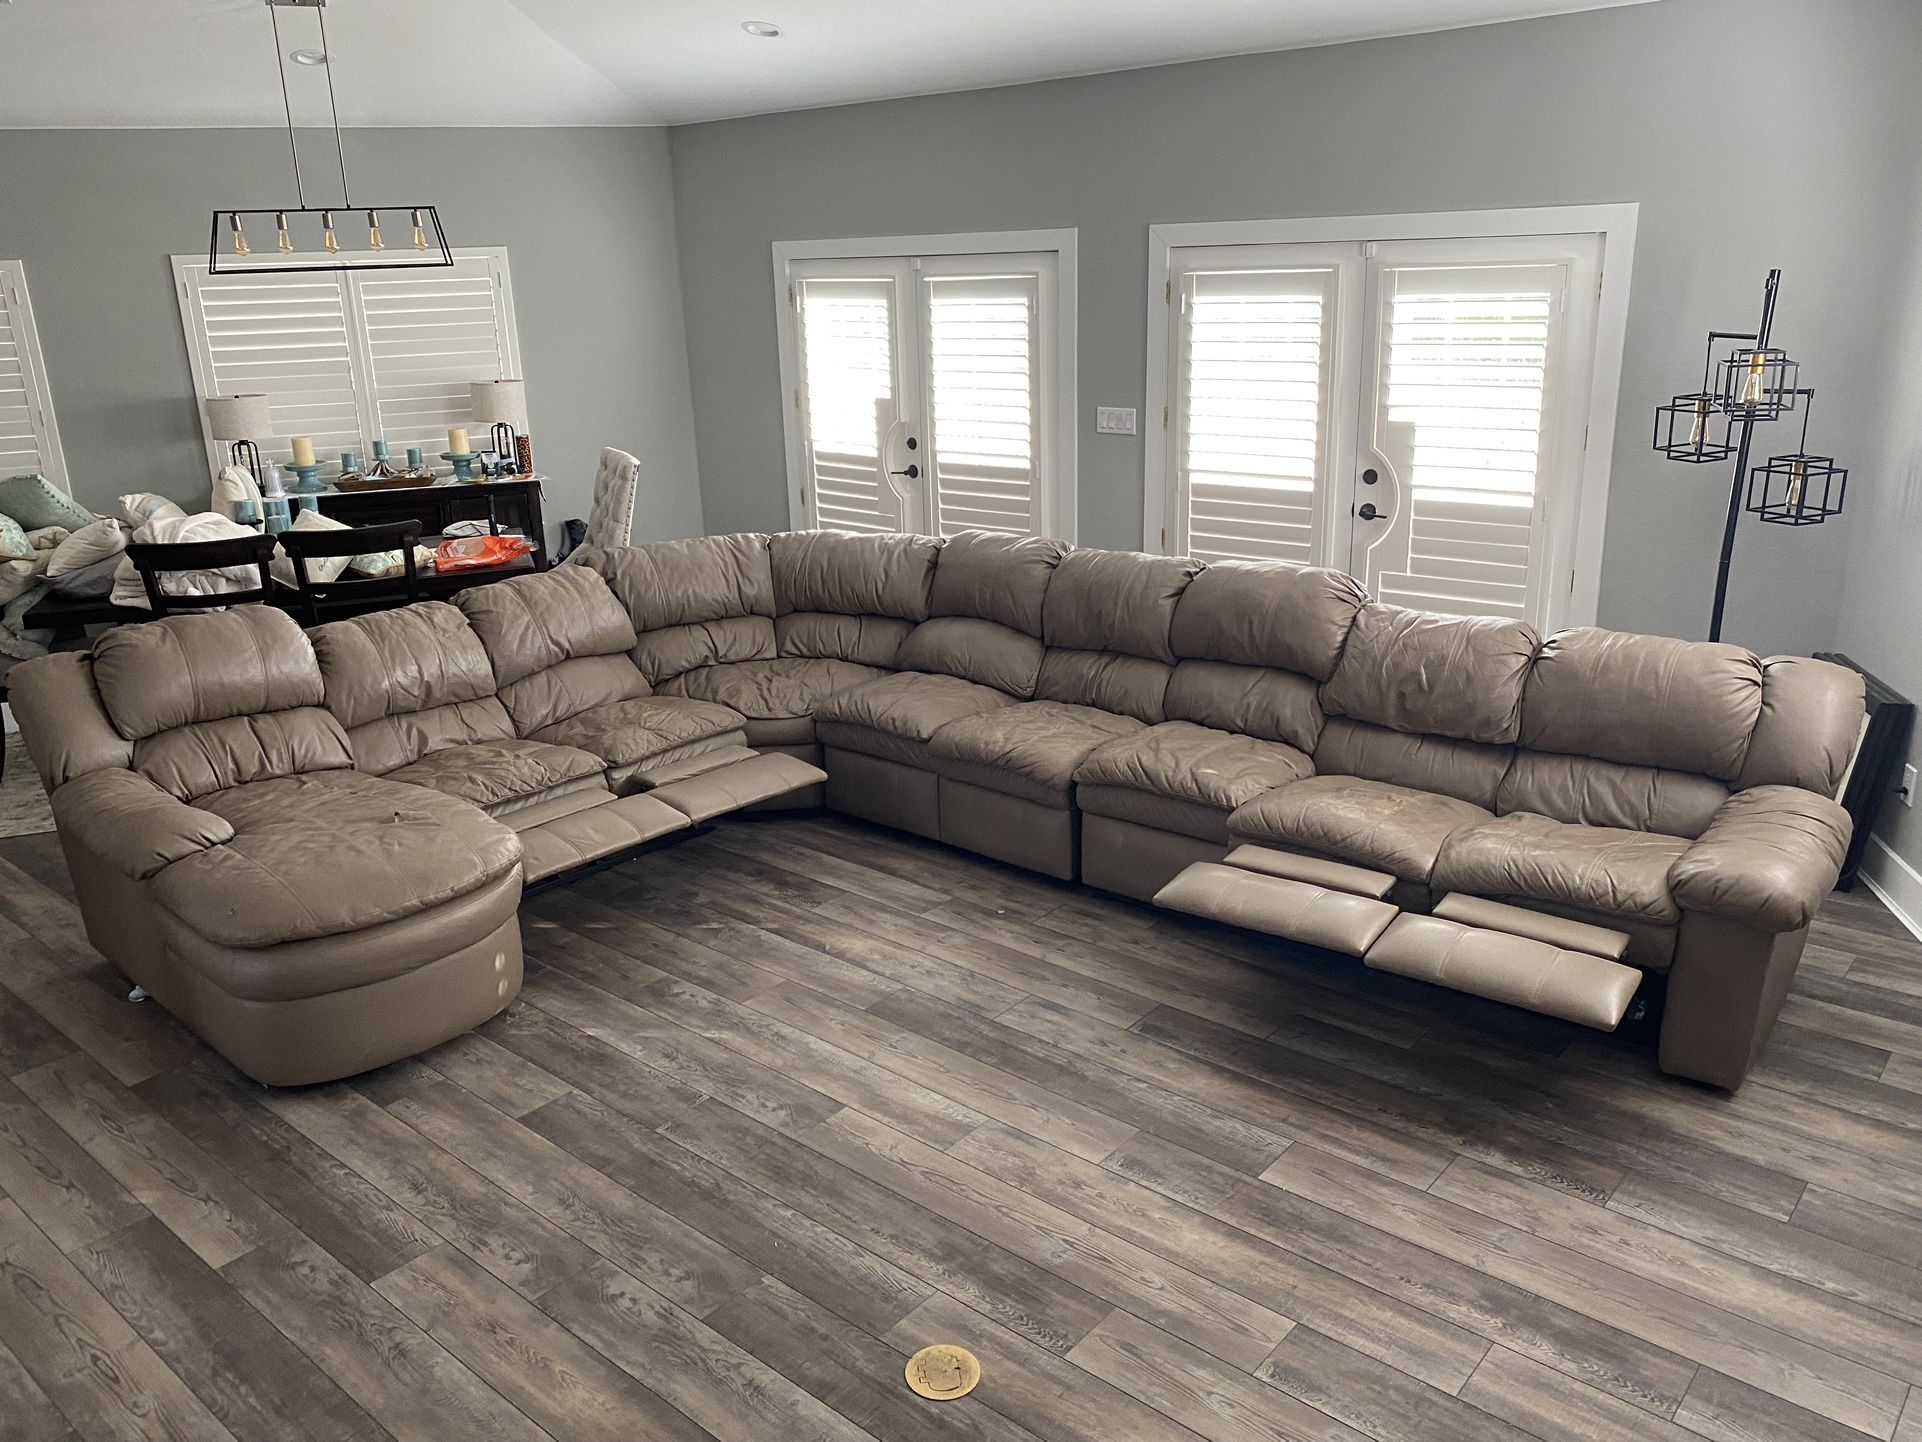 Huge Leather Sectional Sofa with 4 Recliners 